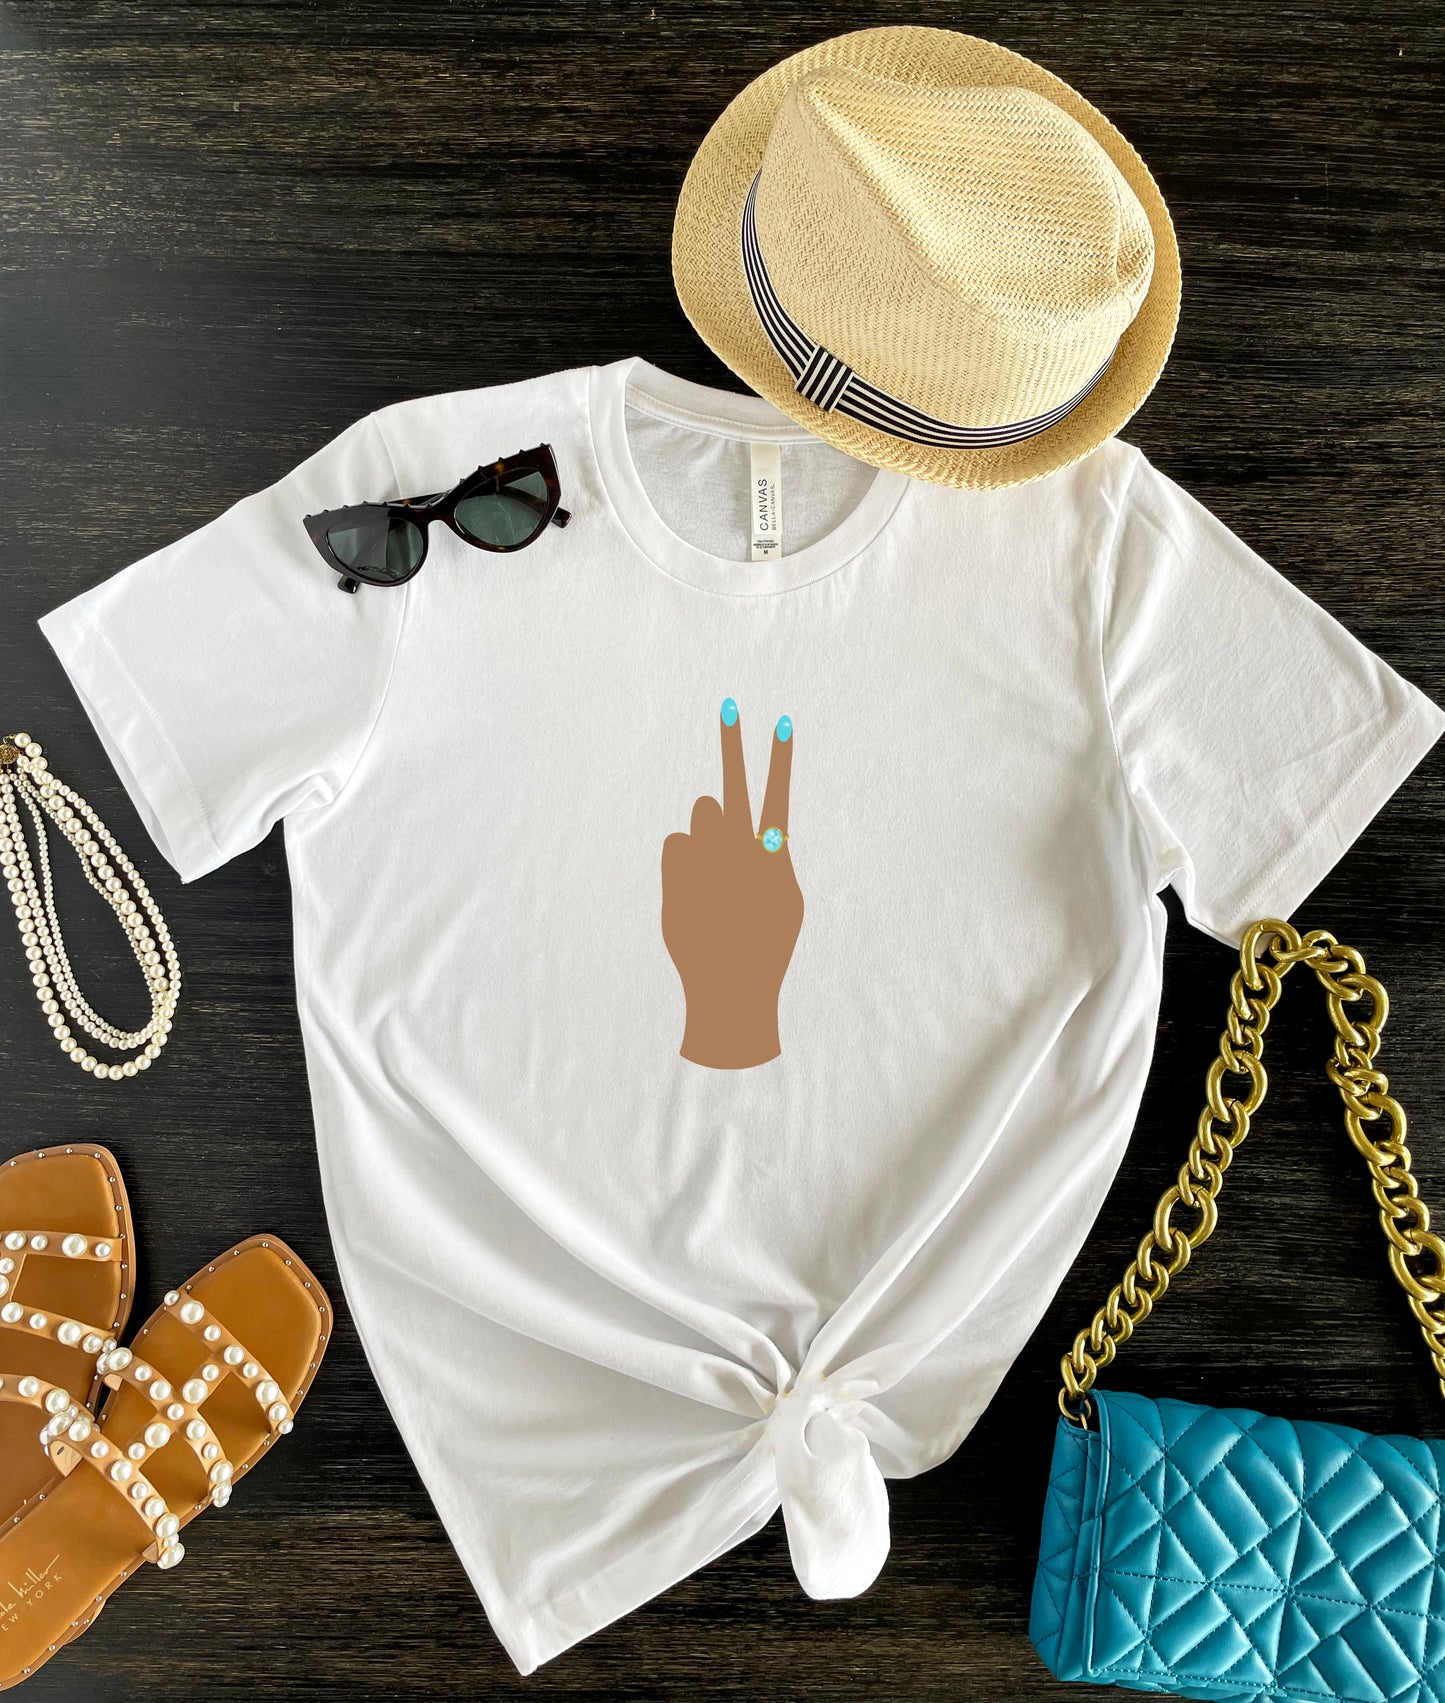 Peace Sign print t-shirt for women. Classic crewneck short sleeve tee features a hand wearing a glamorous aqua ring and a fabulous light blue manicure showing the peace sign. Fantastic gift for her.